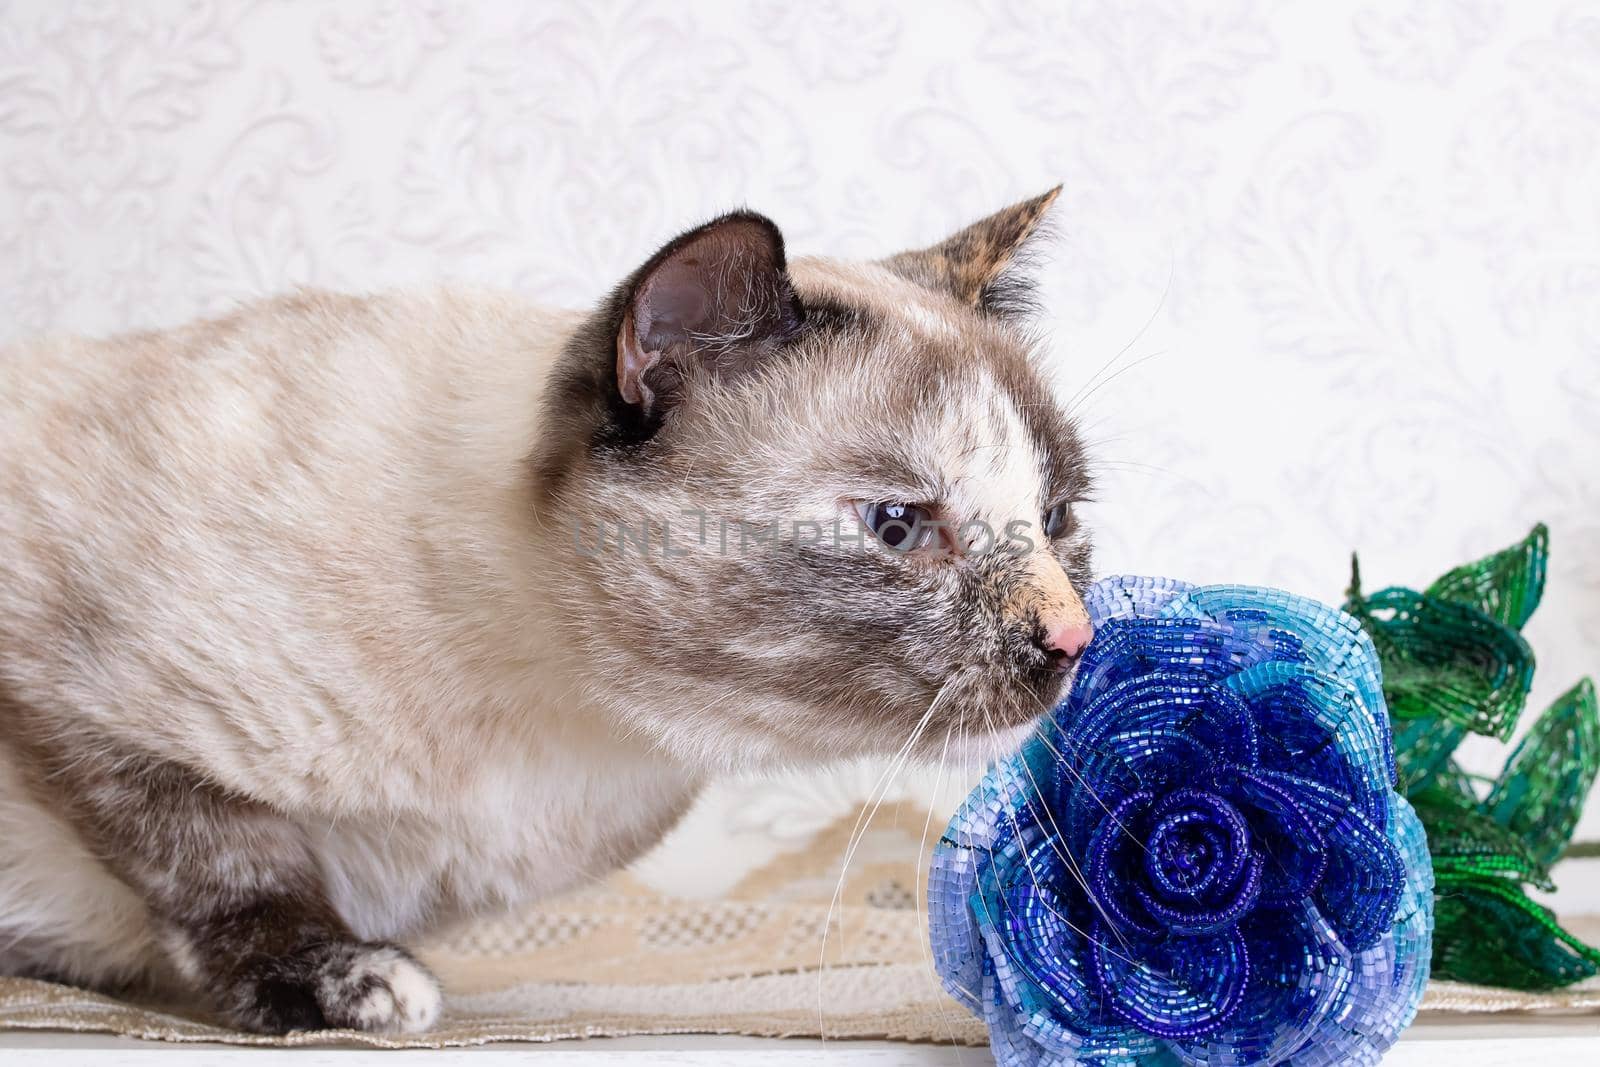 Beautiful gray cat sniffing a blue flower close up